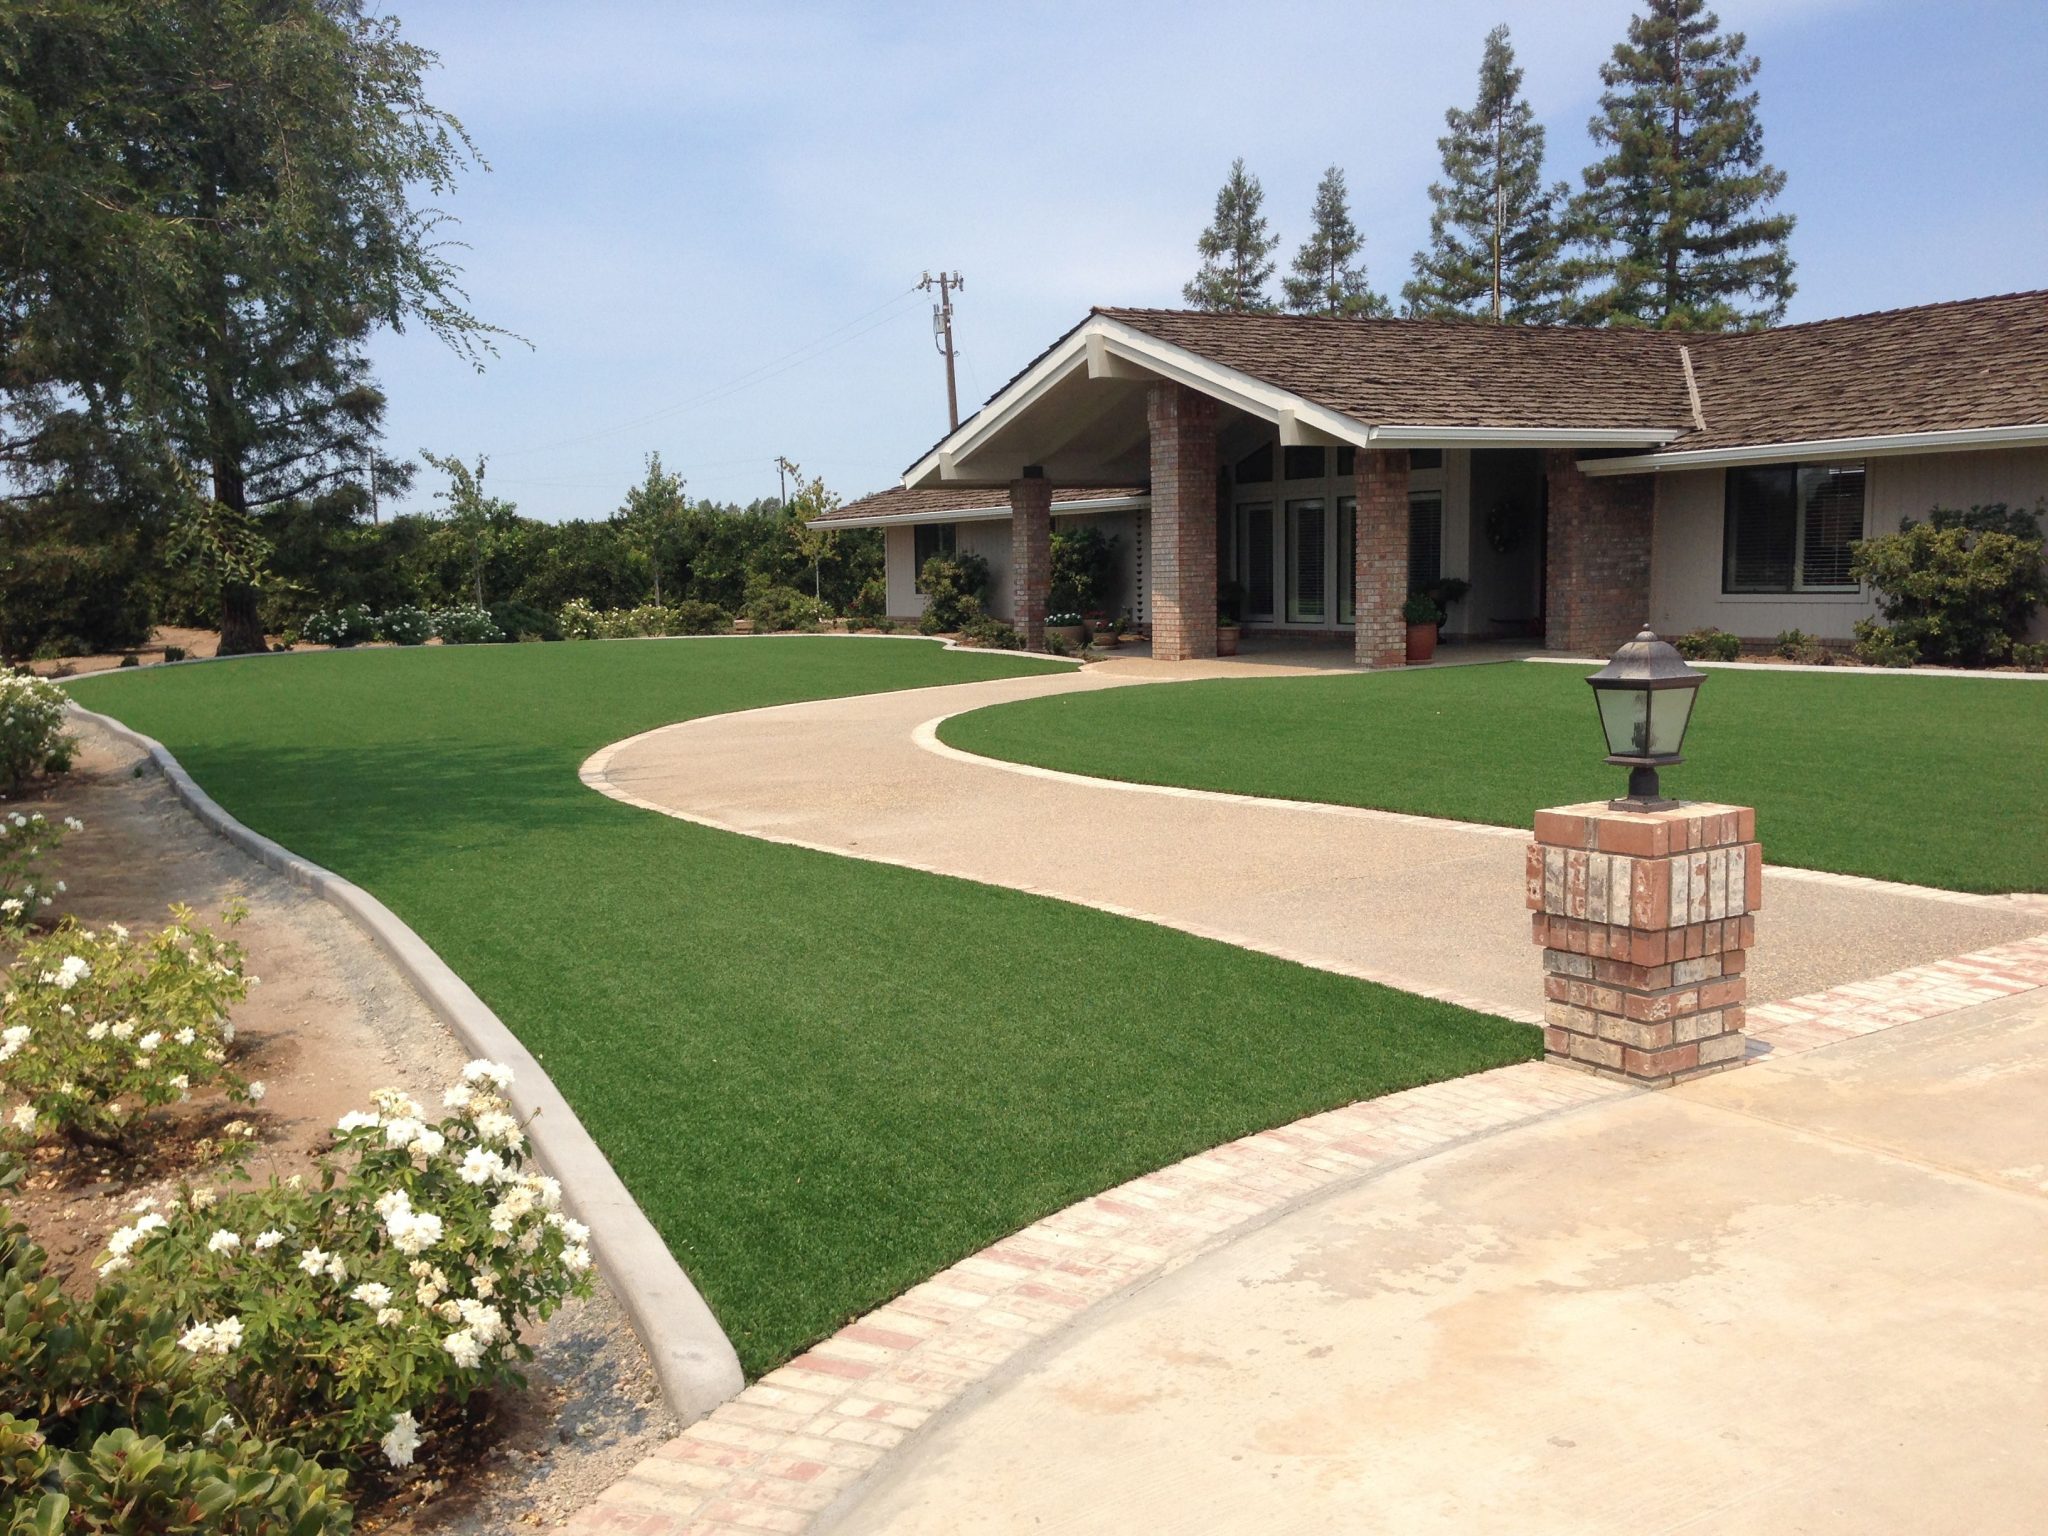 How To Install Artificial Grass In Your Front Yard In San Diego?